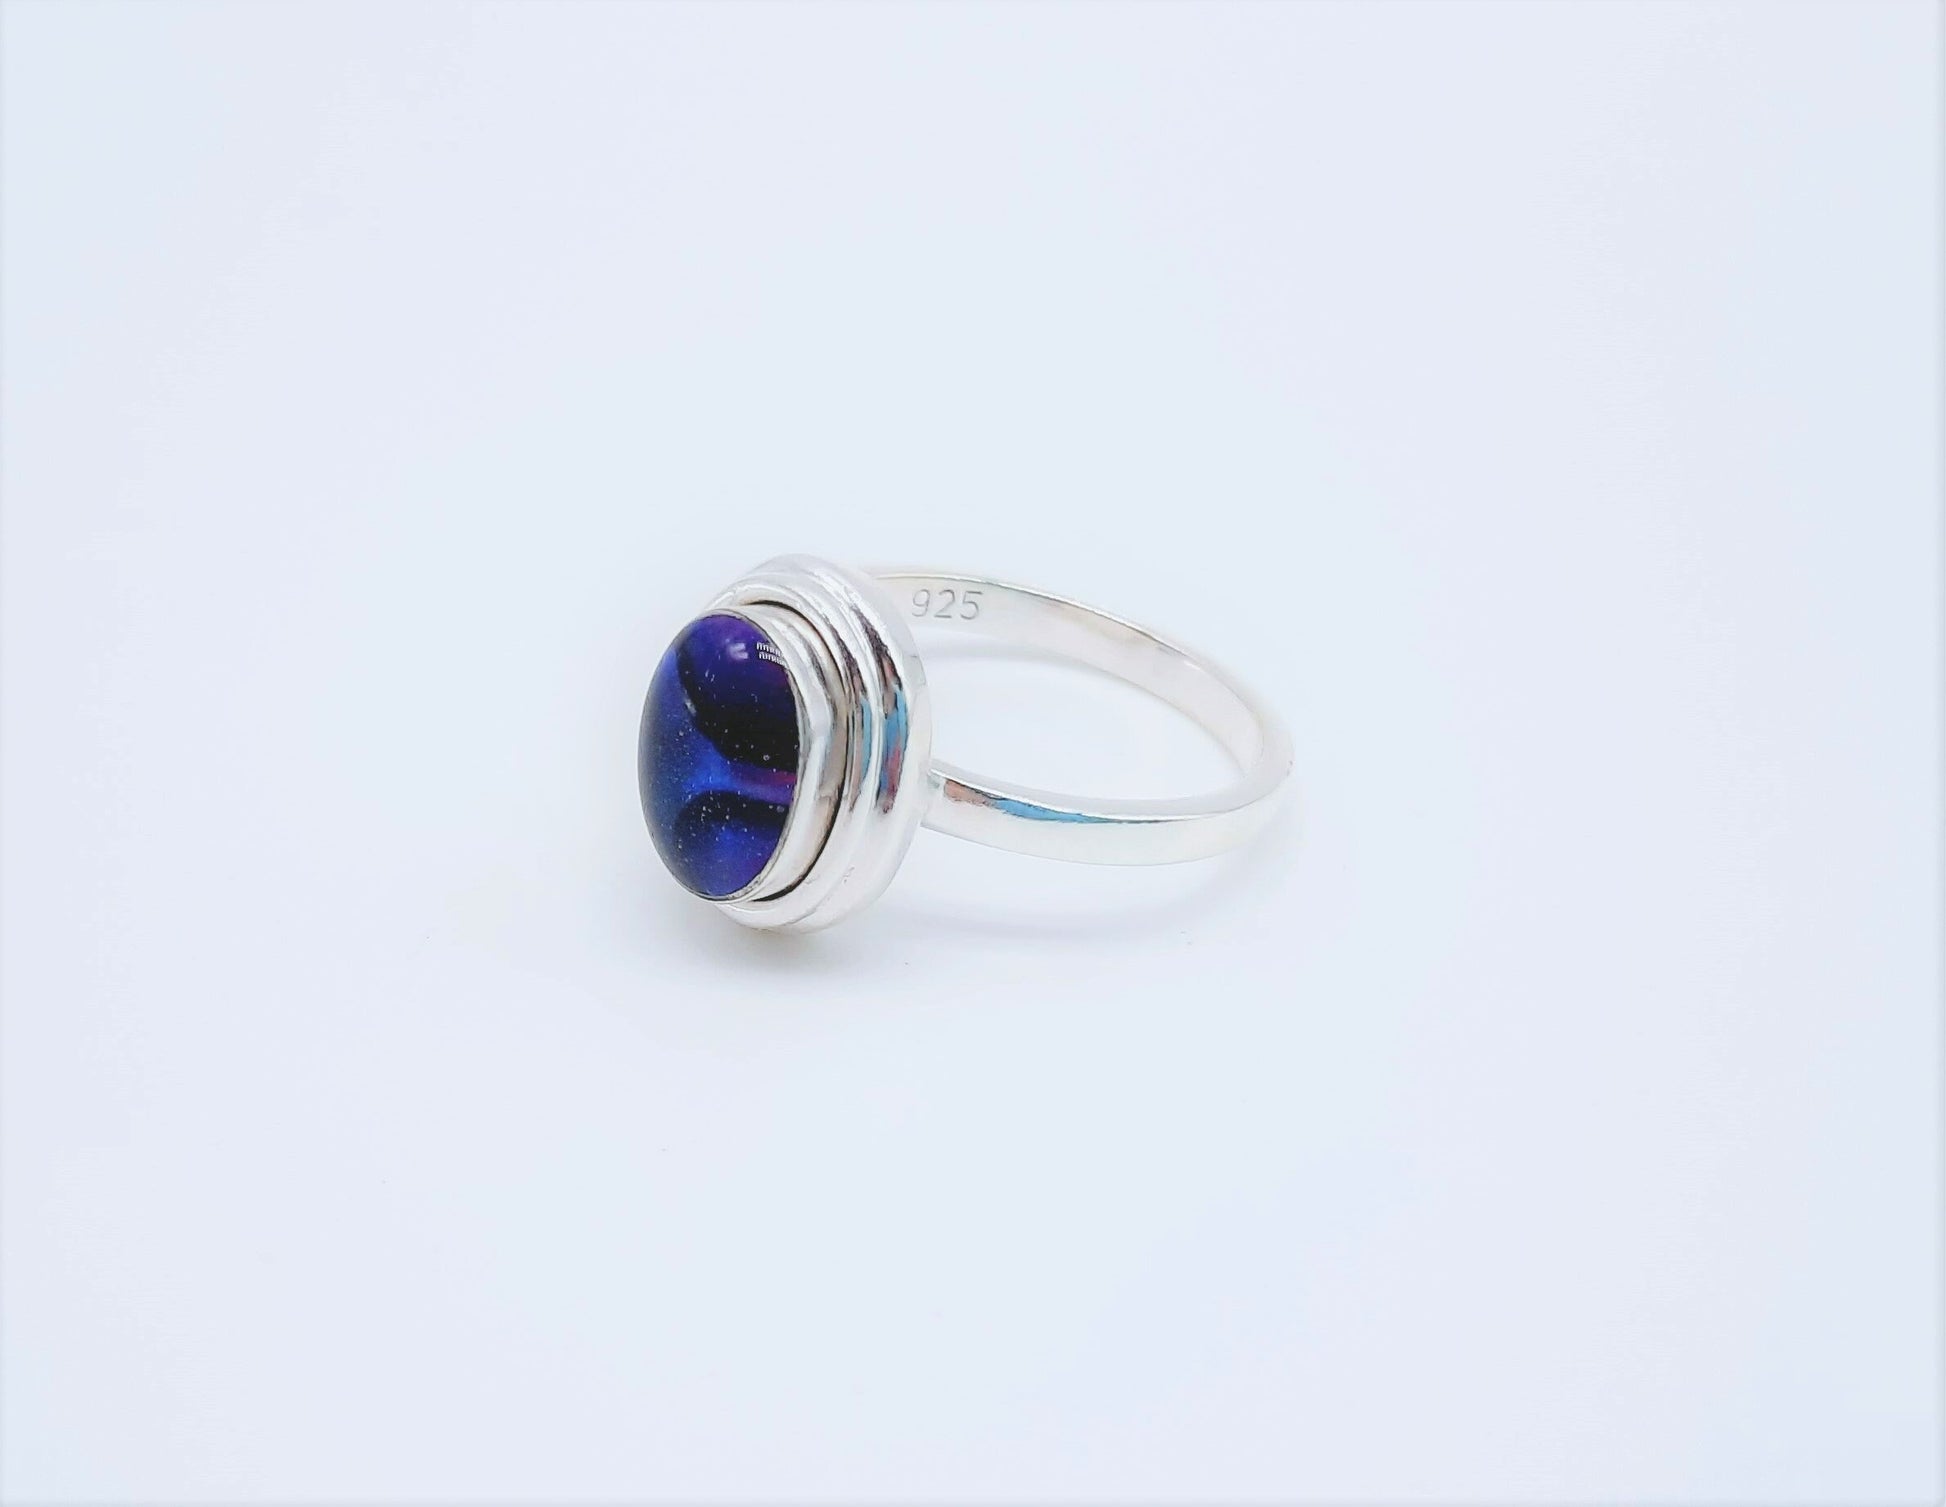 Handmade / Handcrafted 925 Sterling Silver Purple Blue Abalone / Paua Seashell Ring, Oval, Sealed with Holographic Mica Infused Resin